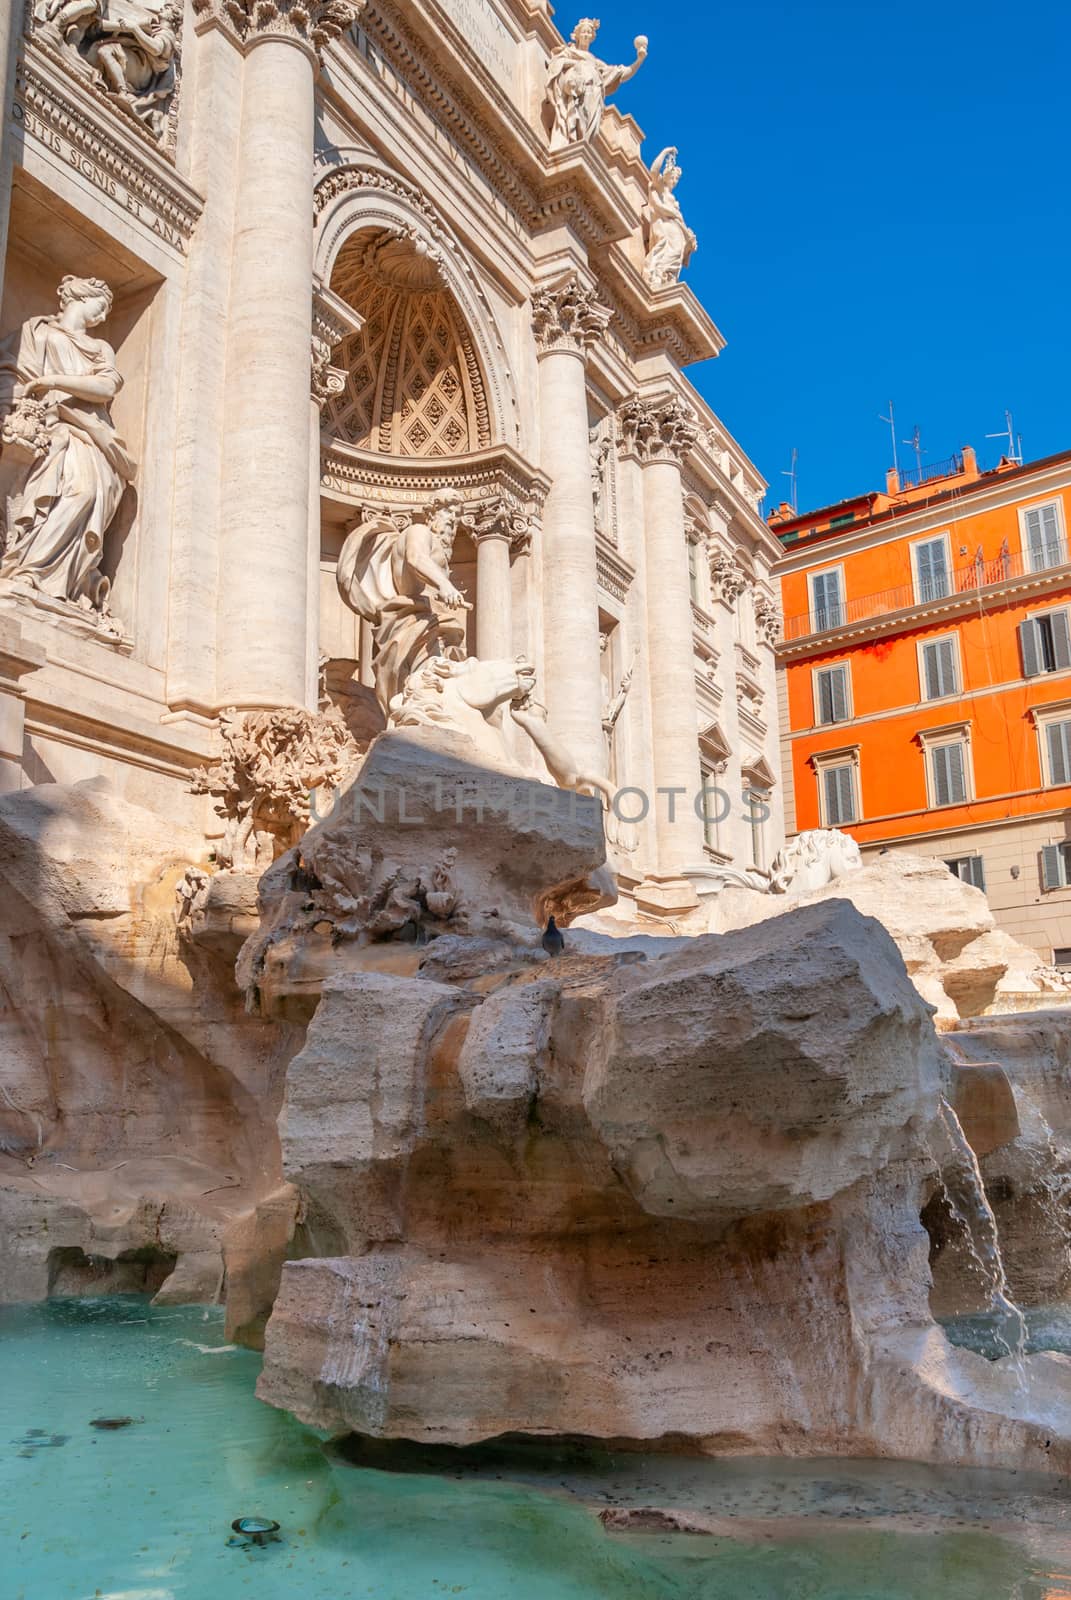 Trevi Fountain, Rome, Italy. Trevi Fountain is one of the main t by Zhukow